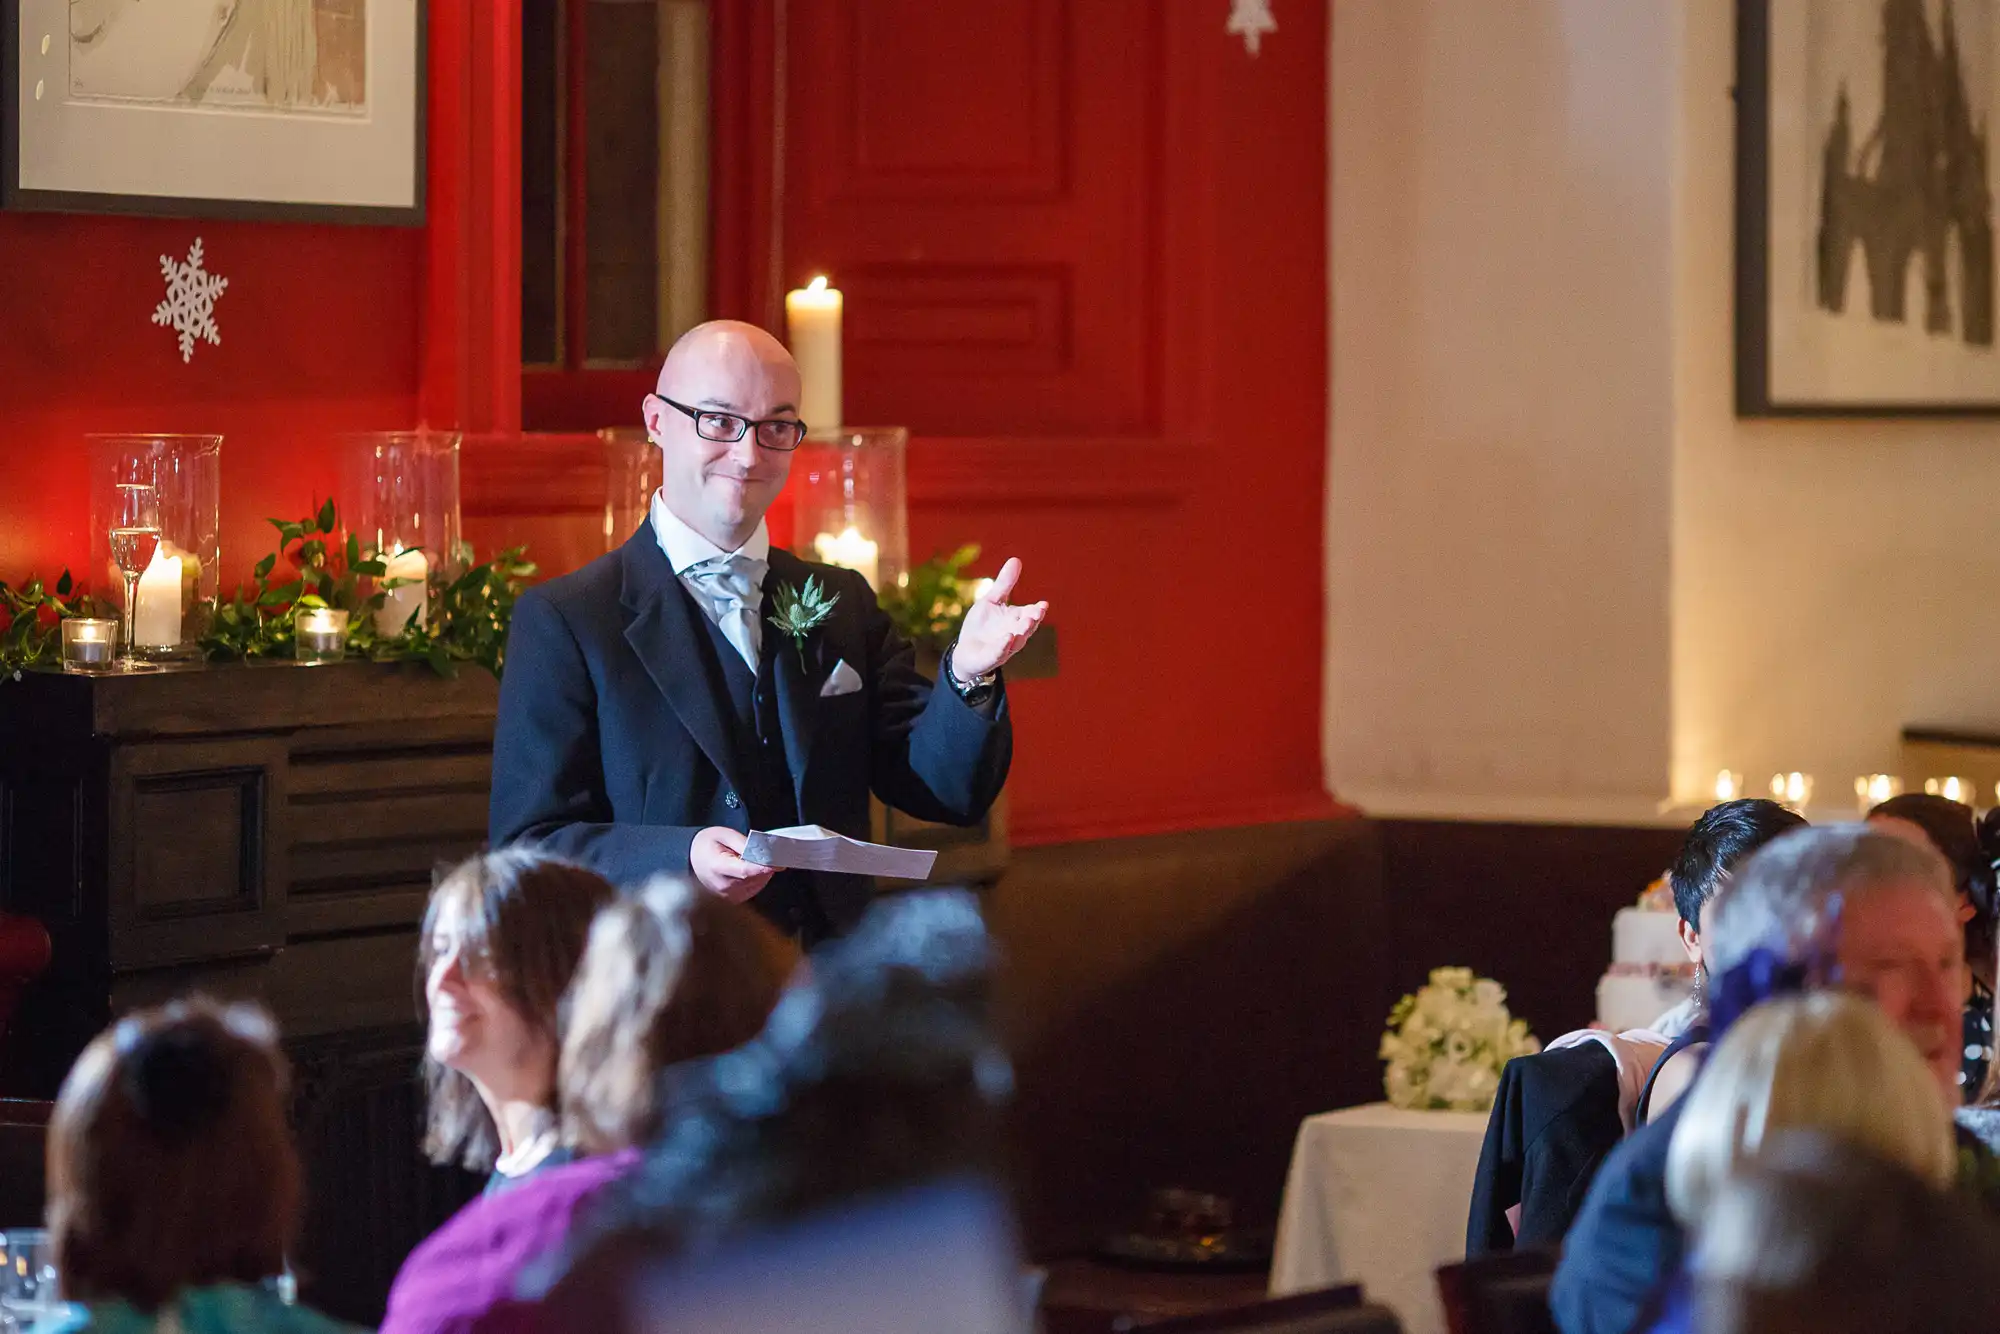 A man in a suit giving a speech at a candlelit event, guests seated around, in a room with red walls and festive decorations.